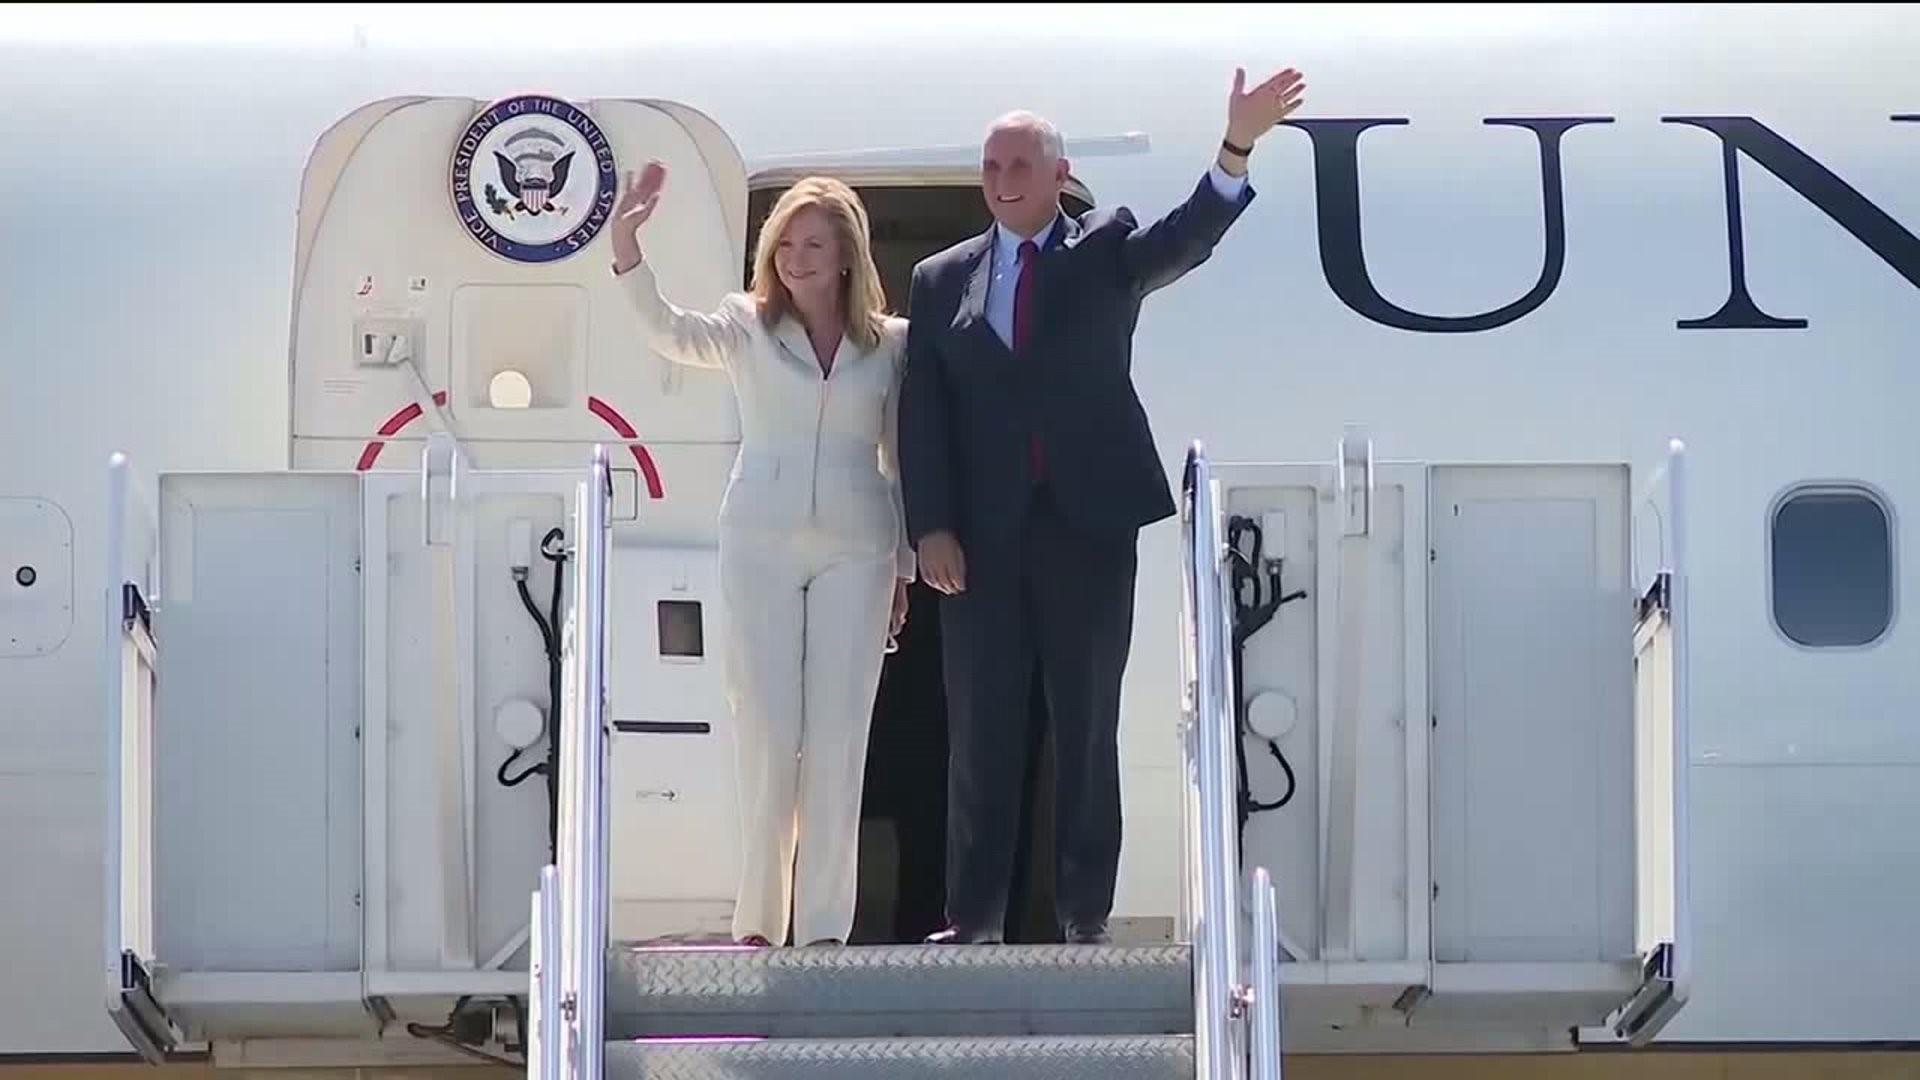 Vice President Pence Coming to PA to Campaign for Lou Barletta